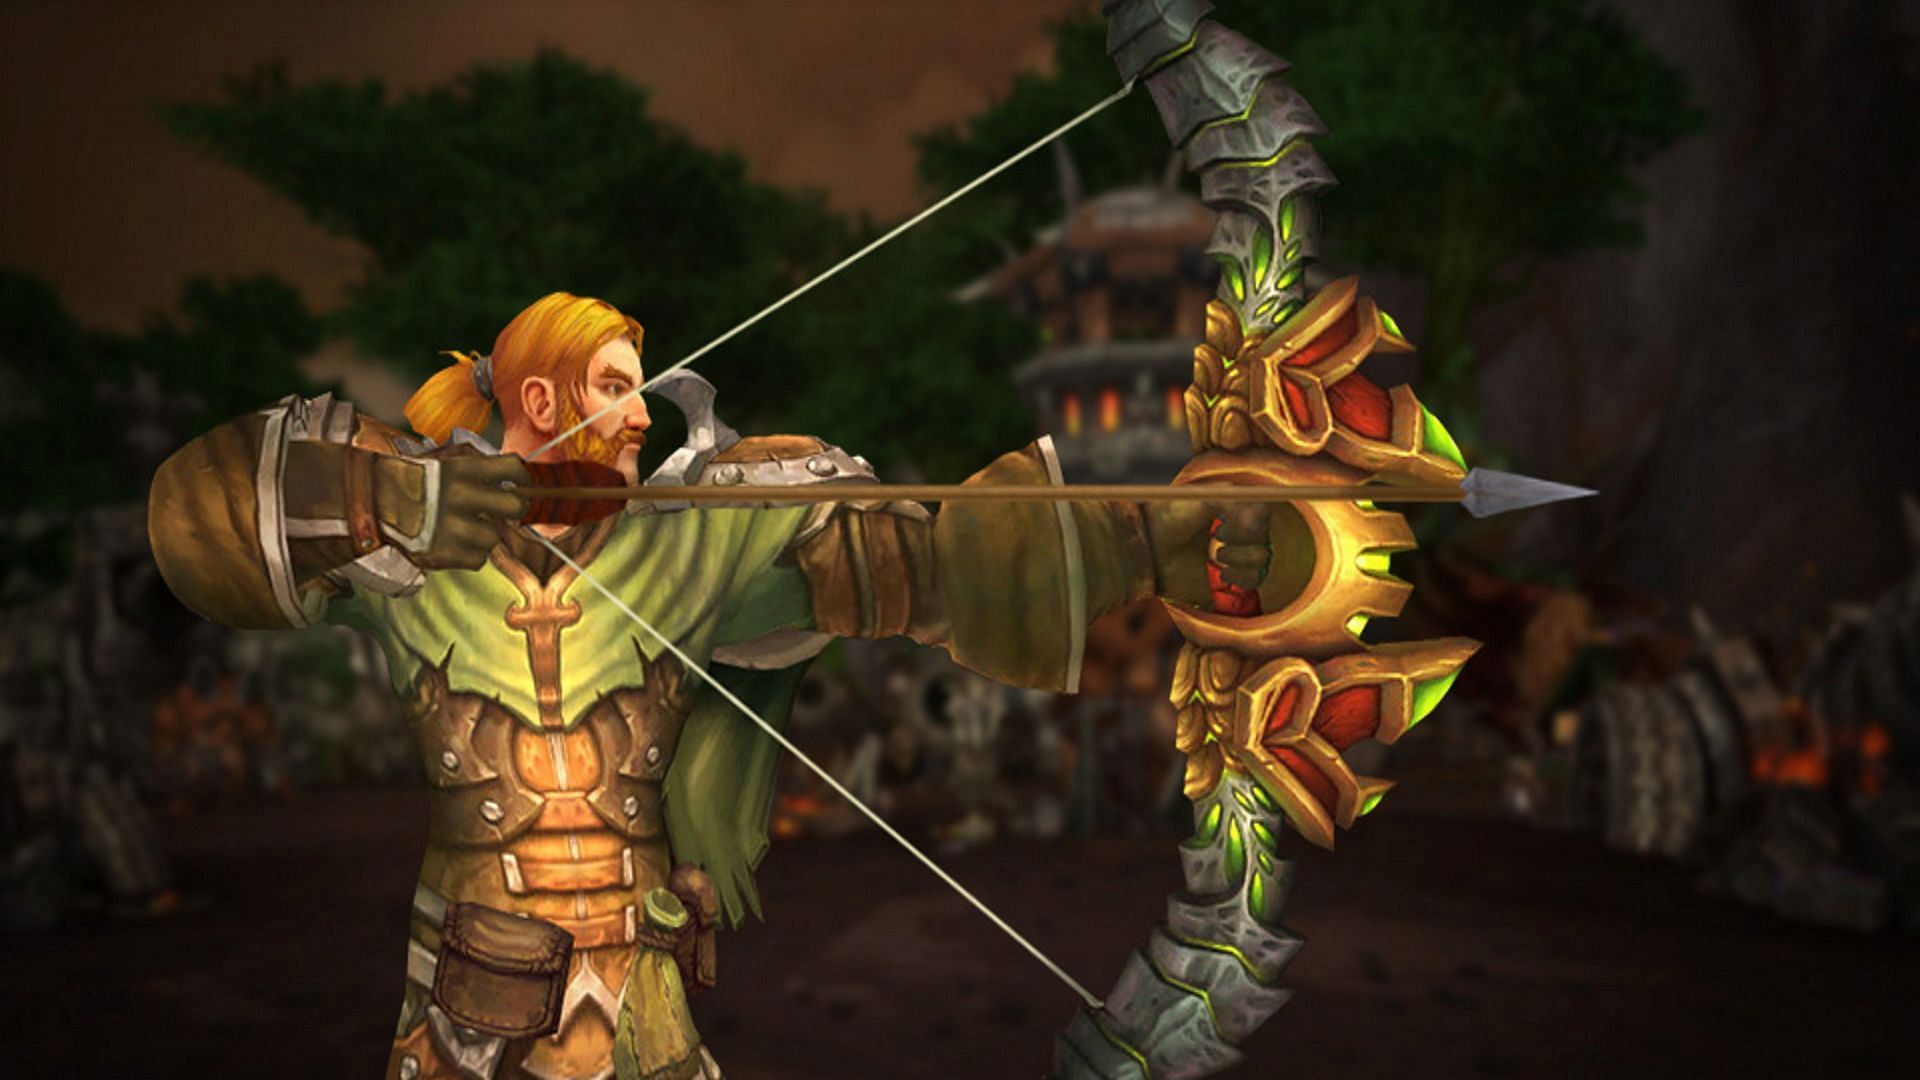 Hunter stretching his bow in World of Warcraft.